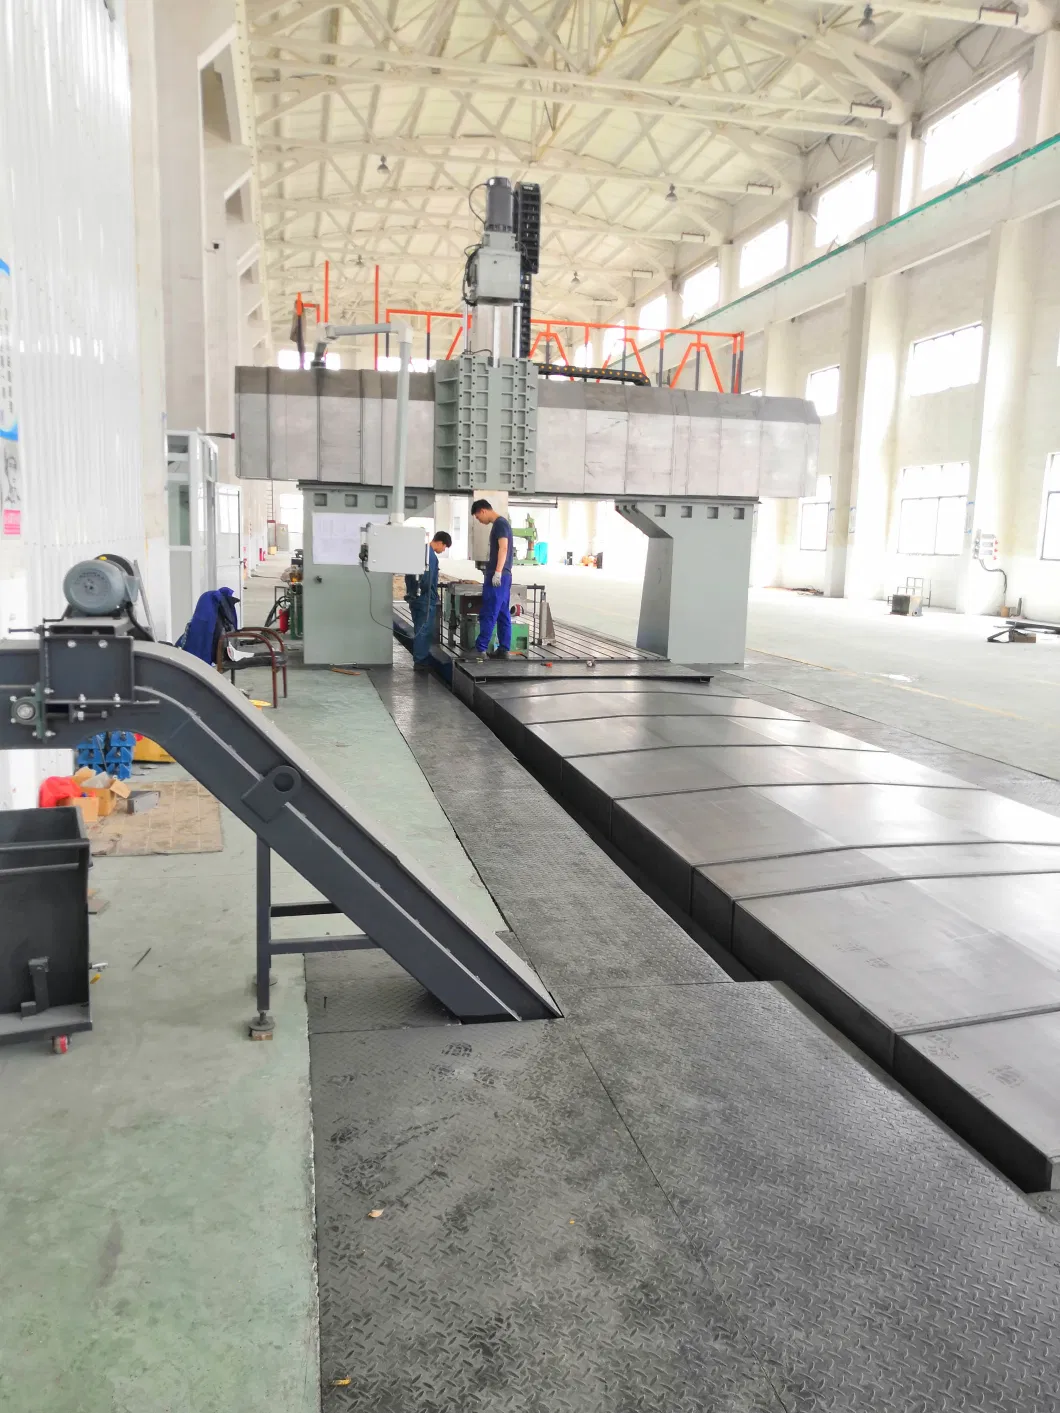 Large Bearing Capacity Fixed Beam Gantry CNC Milling Machine for Ferrous Metals Roughing and Finishing OEM/ODM